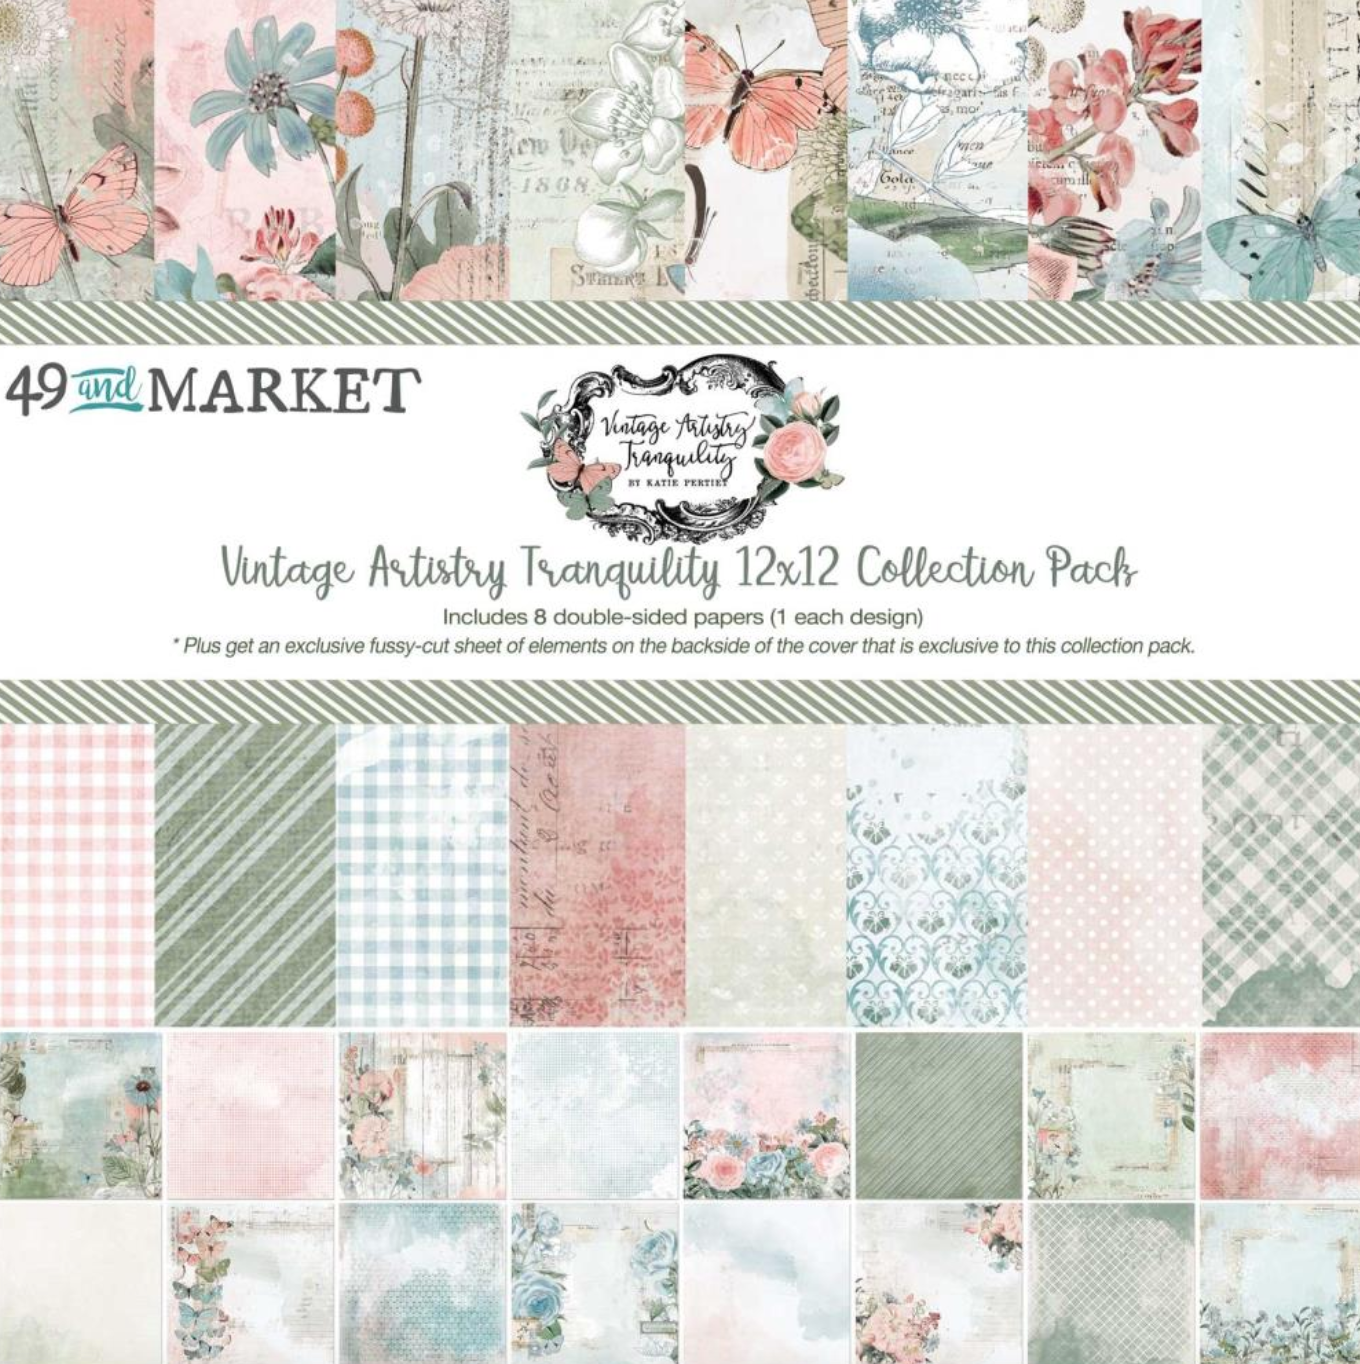 12x12 Inch - Vintage Artistry Tranquility - 49 And Market - Collection Pack